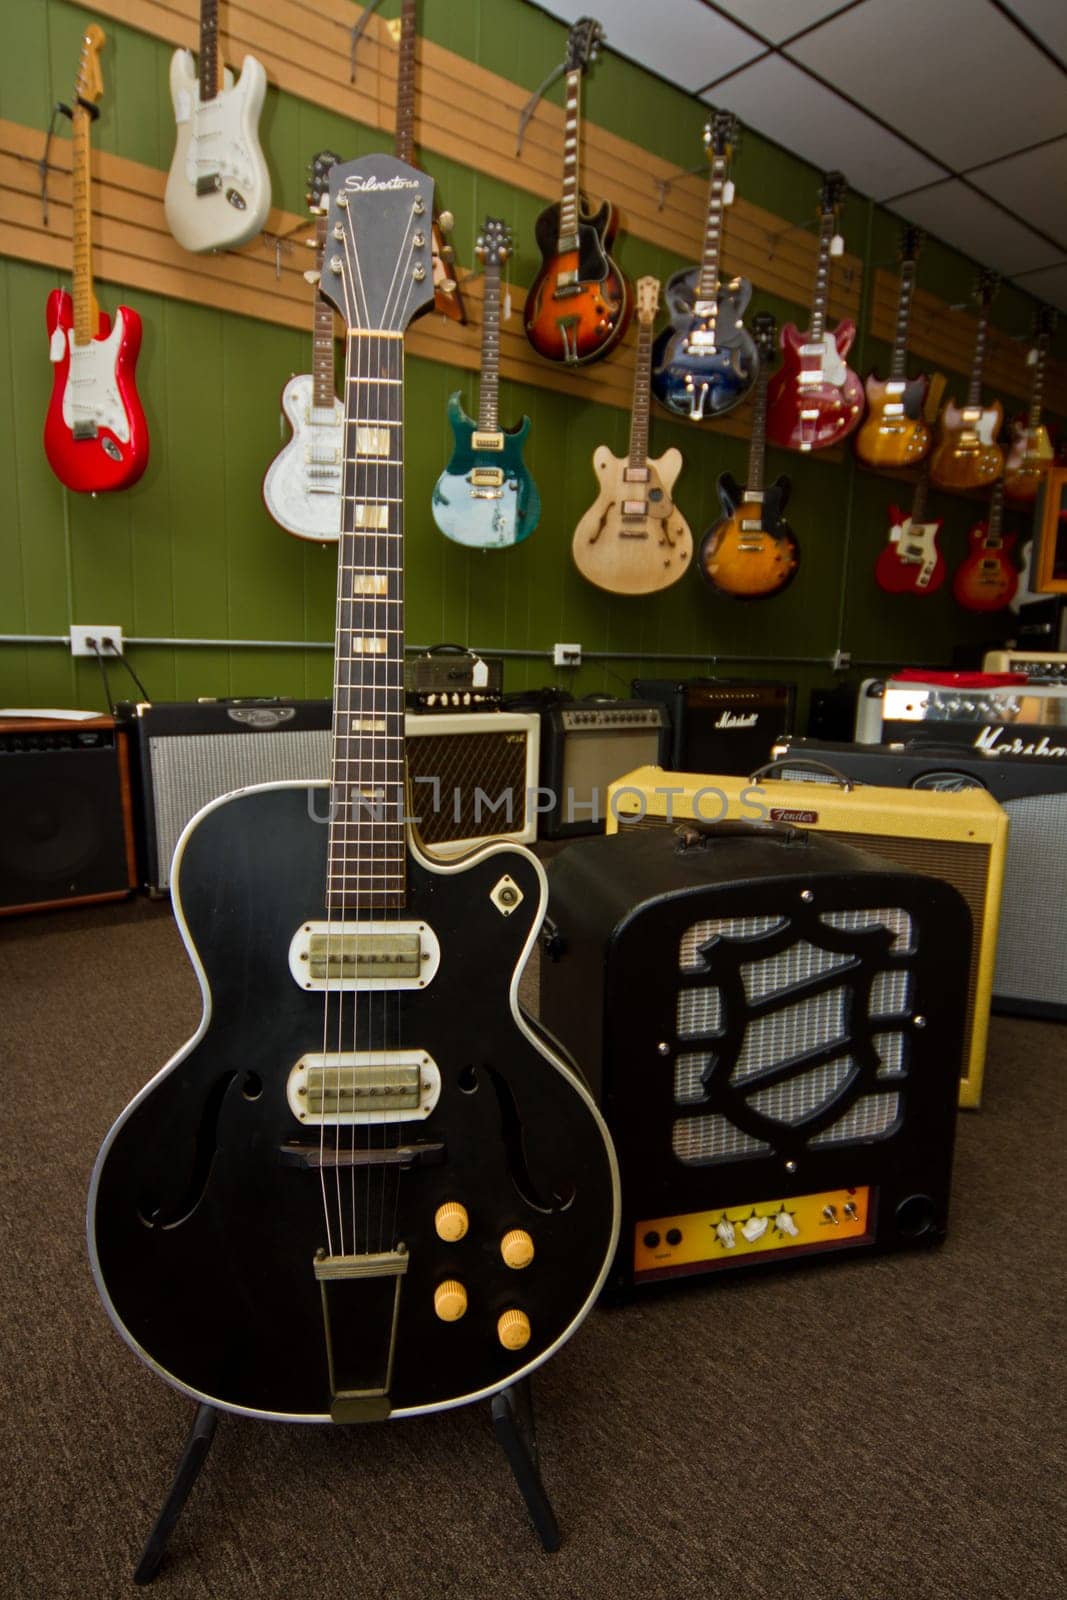 Vintage Electric Guitars and Amplifiers on Display in Music Store in Fort Wayne, Indiana